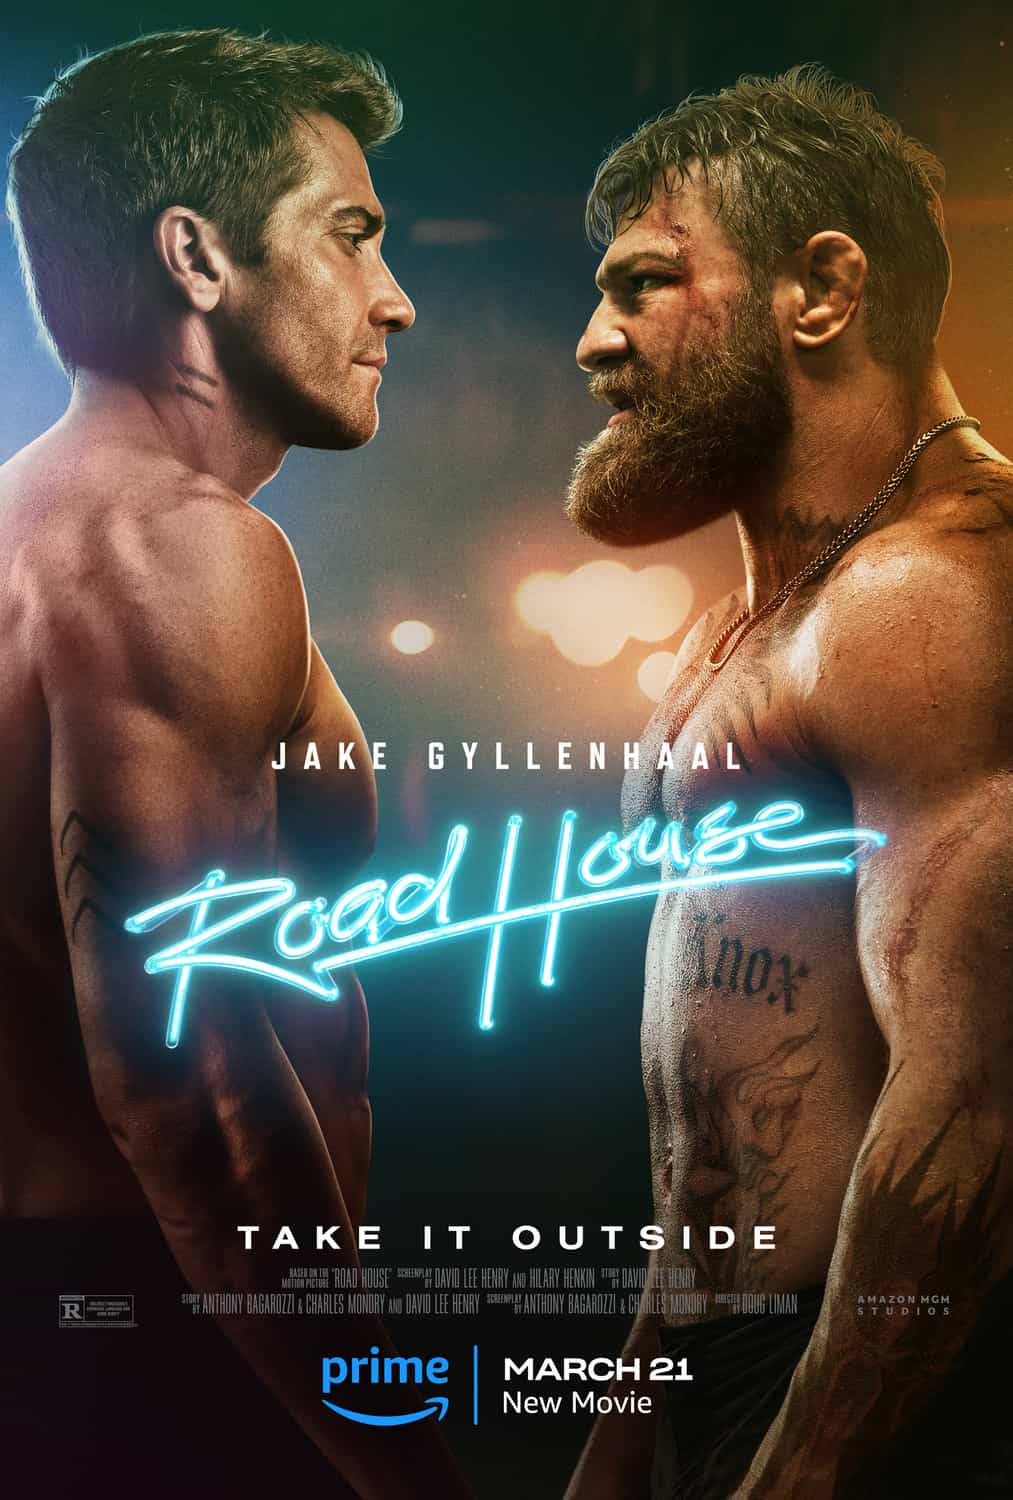 Check out the new trailer and poster for upcoming movie Road House which stars Jake Gyllenhaal and Darren Barnet - movie UK release date 1st January 1970 #roadhouse